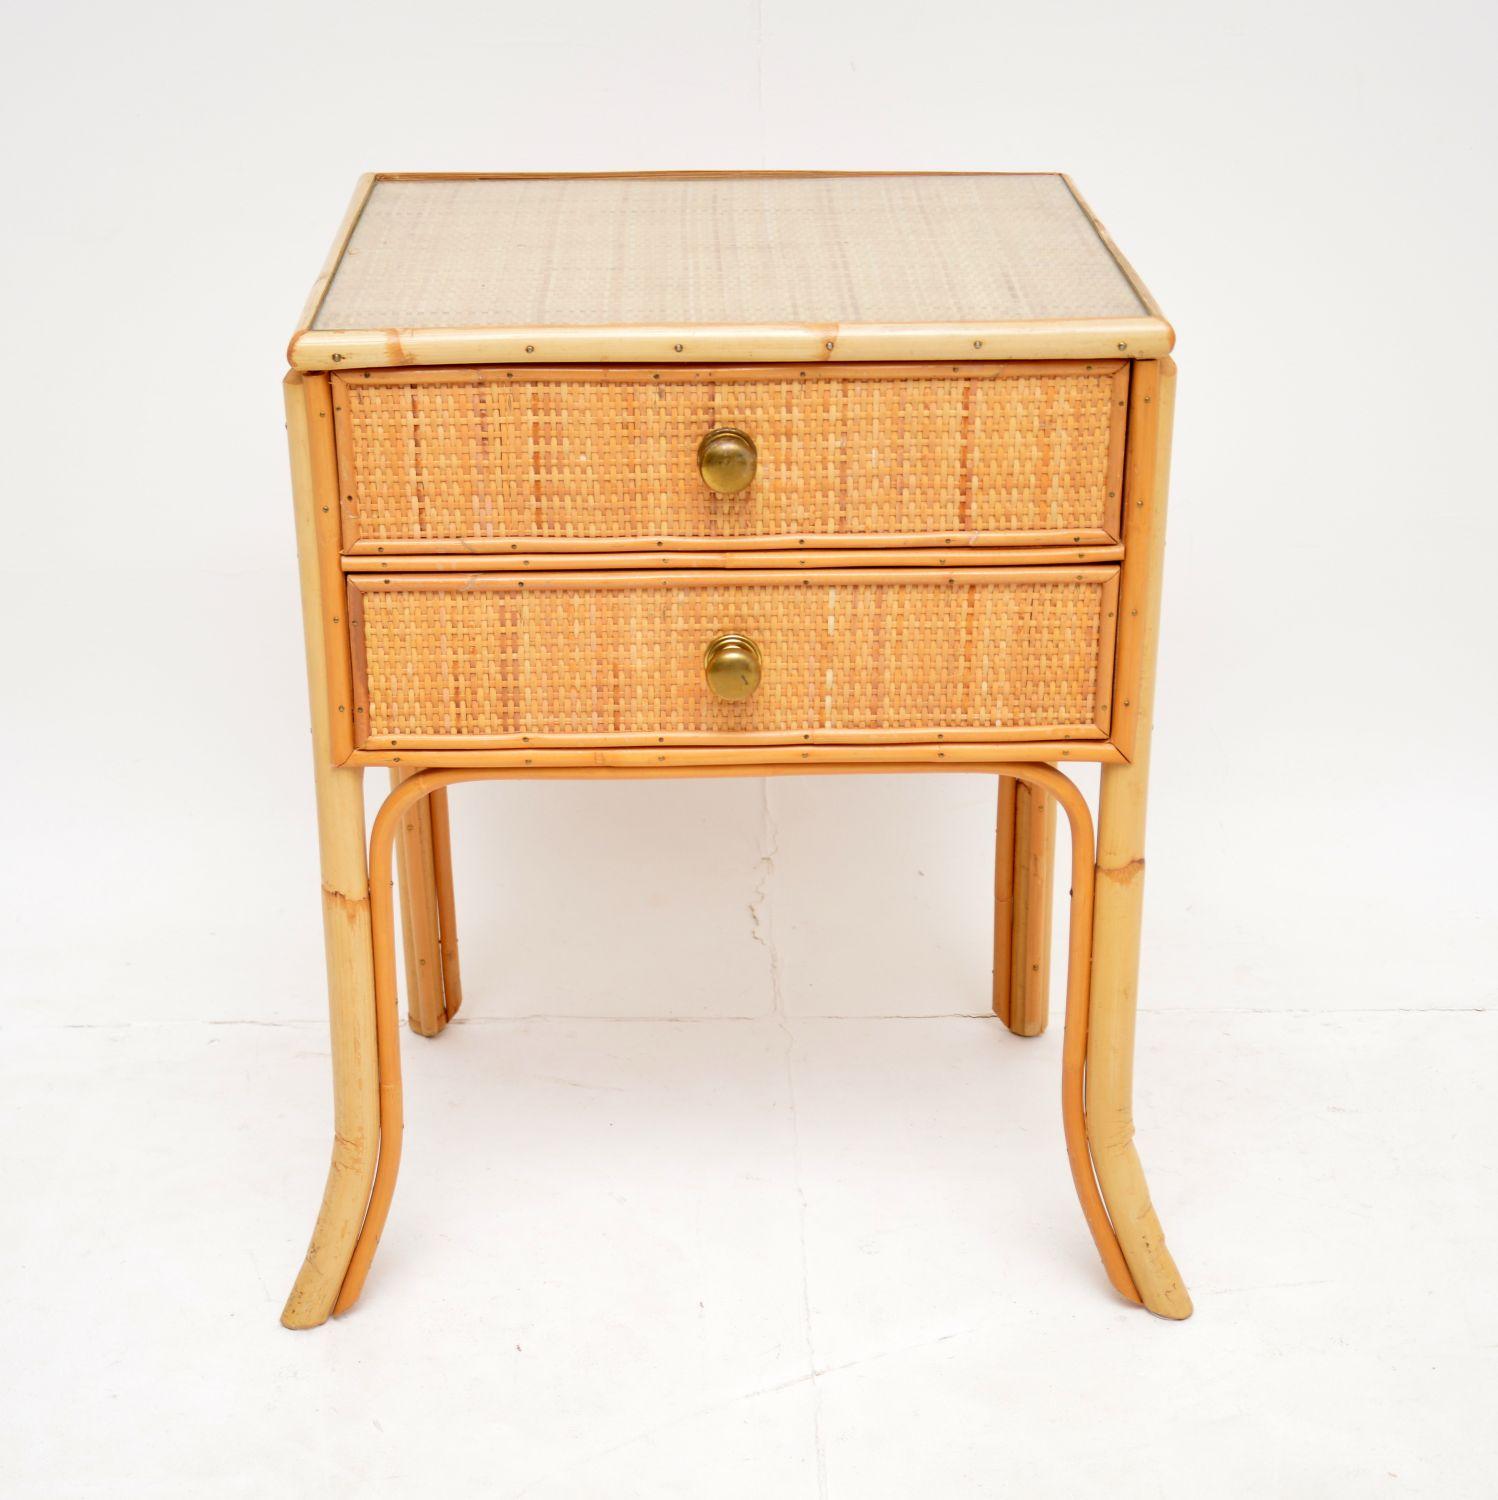 A beautiful two drawer side table with a bamboo and rattan frame. This was made in England, it dates from around the 1970-1980’s.

The quality is excellent and this is a very useful size. It is perfect for use as a bedside table or occasional side